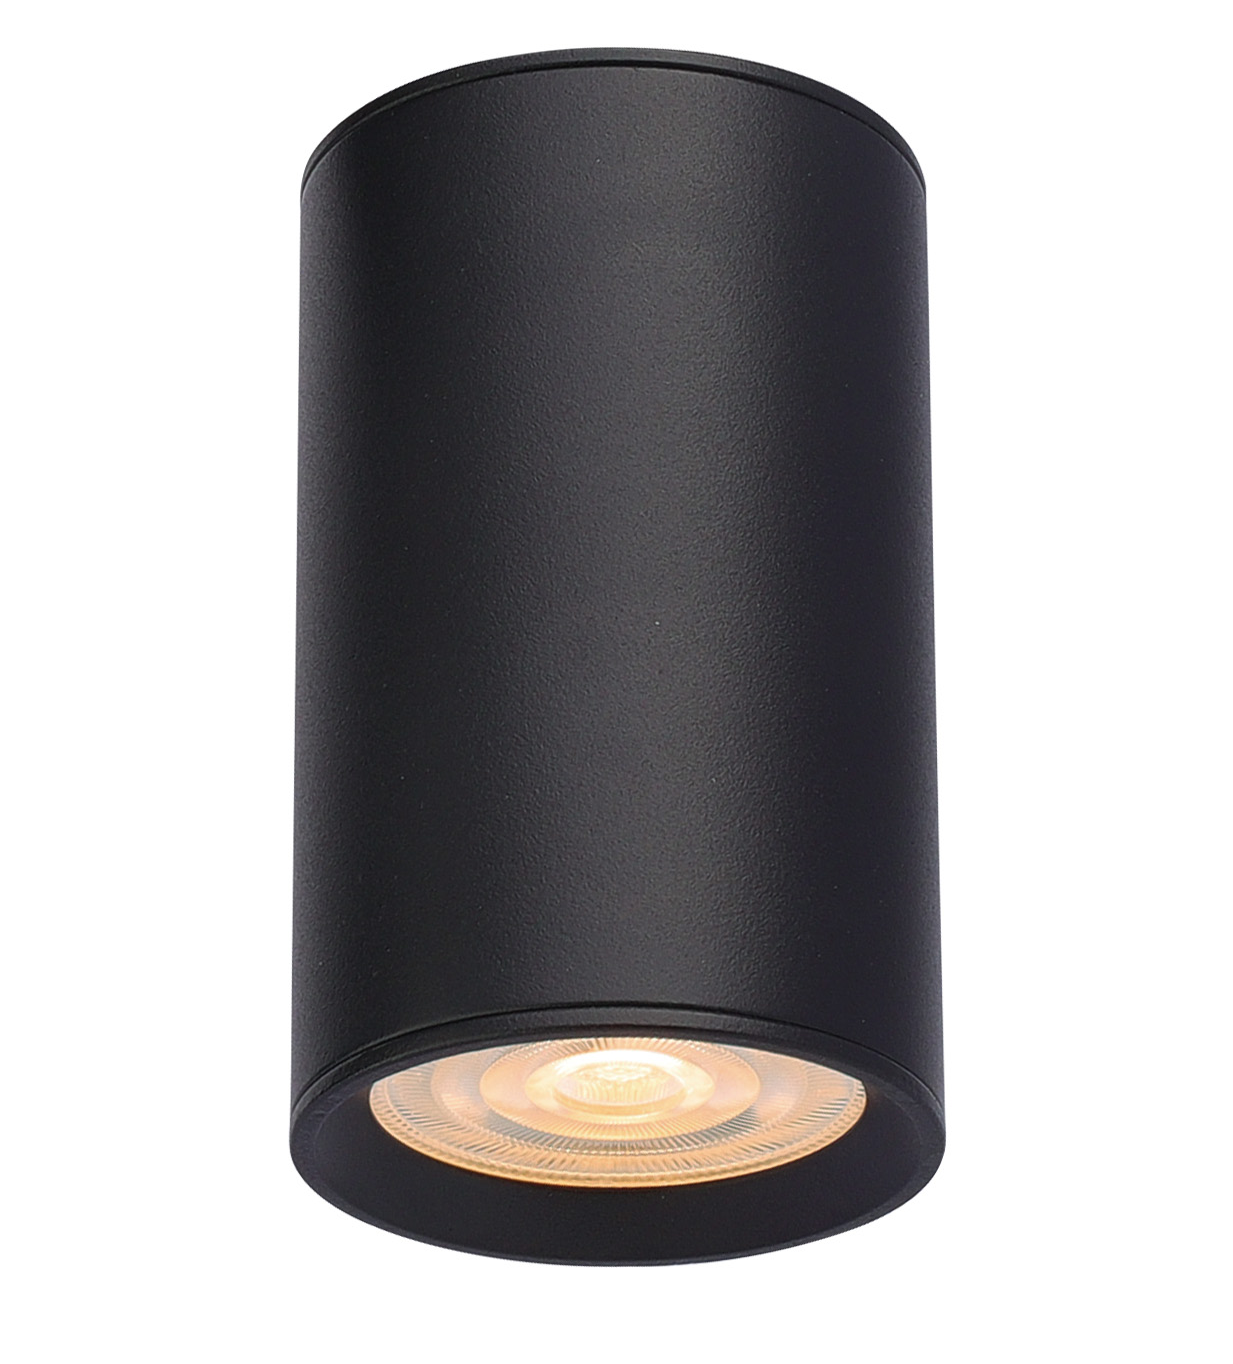 GU10 Track Light Surface Mounted Fitting